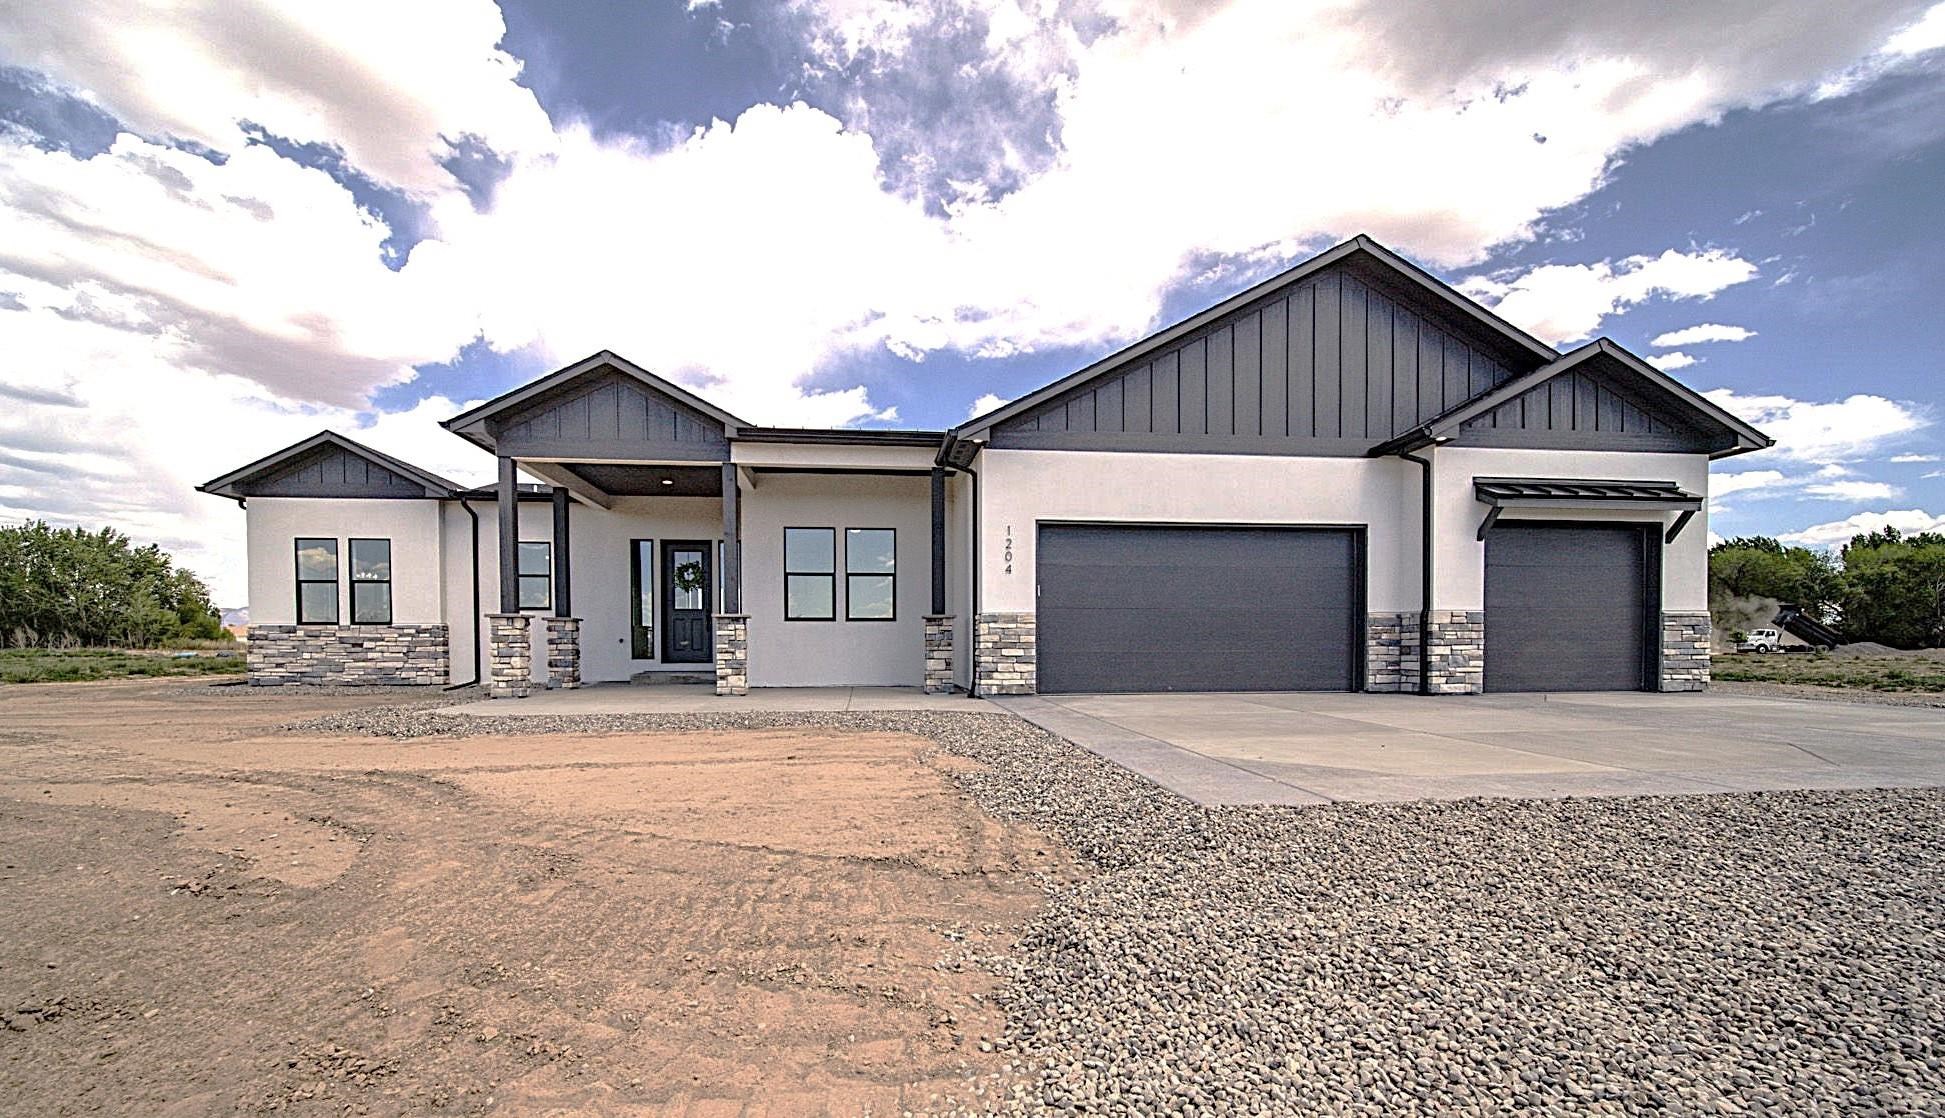 ***$15,000 Landscaping Credit now offered with acceptable offer on this NEW Construction home on a 1 ACRE lot just north of Fruita!  Come see all that this beautifully built, 2,501 square foot home has to offer. You will love the open concept, split floor plan with ample natural light! The primary suite boasts a gorgeous pedestal tub in a spacious bathroom, with a timeless black and white tiled shower and dual vanity. The entertainment space centers around a beautiful stone fireplace and a kitchen with stunning quartz countertops. Sophisticated luxury vinyl flooring throughout makes for easy living. A chic mud room off the finished and epoxied garage will keep your home organized, and a convenient laundry sink offers a space to tidy up.  Enjoy your coffee on a covered patio facing the Grand Mesa and the Bookcliffs. Plenty of room to build a shop or have a private backyard. You'll love this energy efficient home, complete with a tankless water heater and recirculation line. Stainless steel appliance package includes refrigerator, electric oven and convection microwave oven, gas cooktop with a range hood, and small beverage cooler. All info subject to error and should be verified by Buyer.